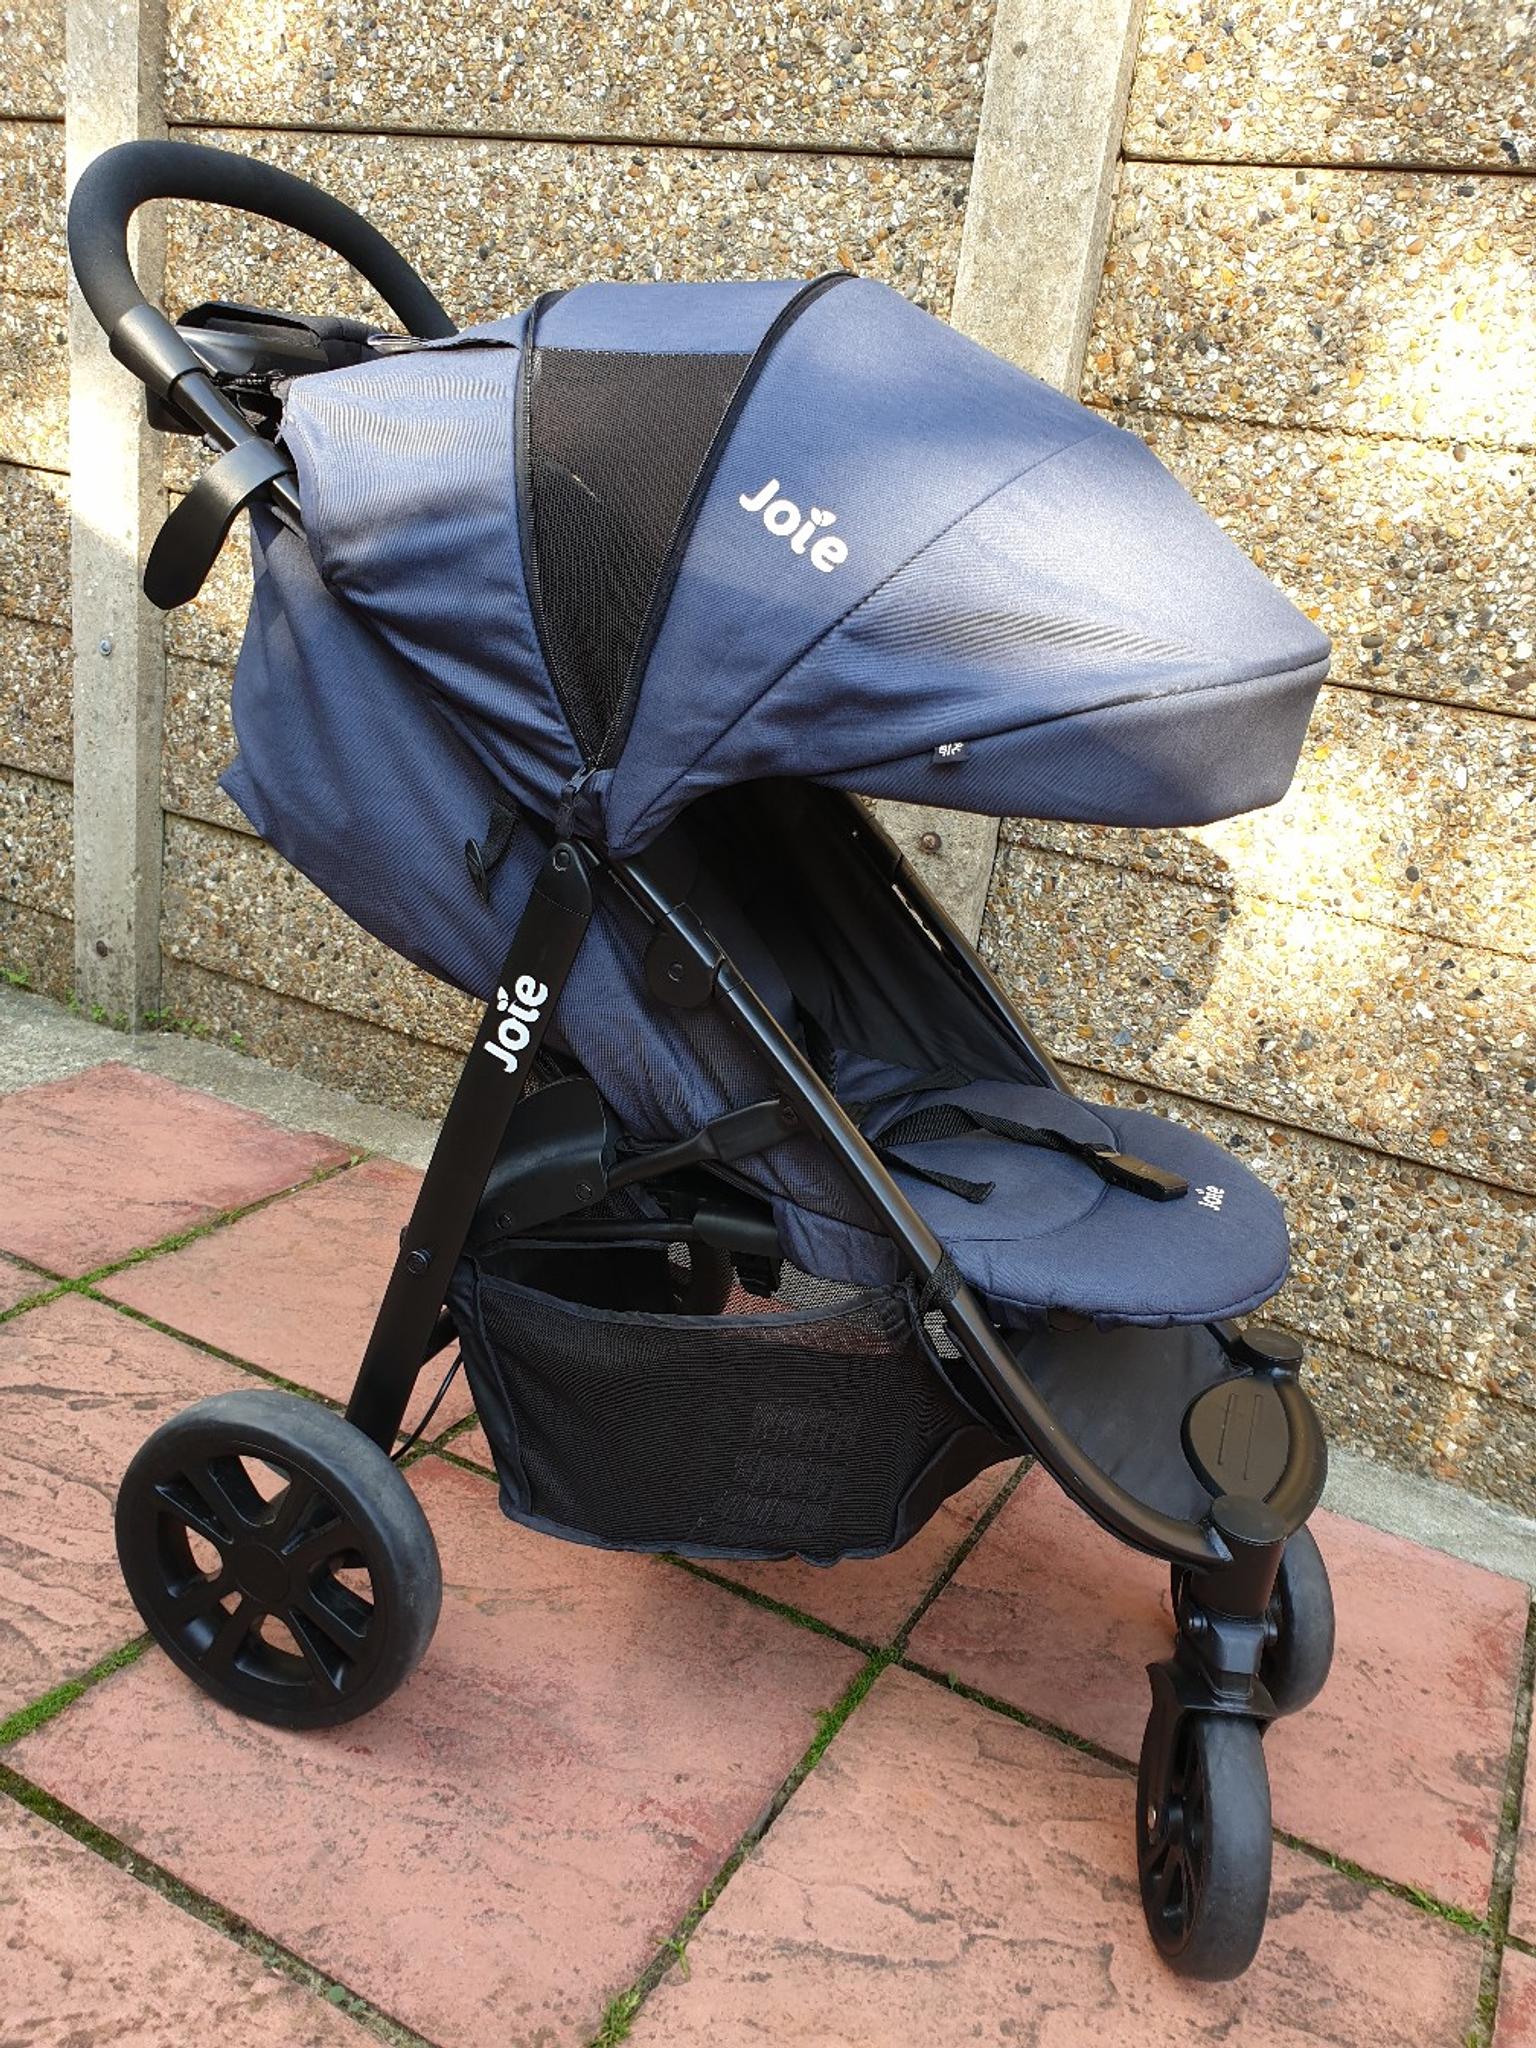 smyths joie double buggy